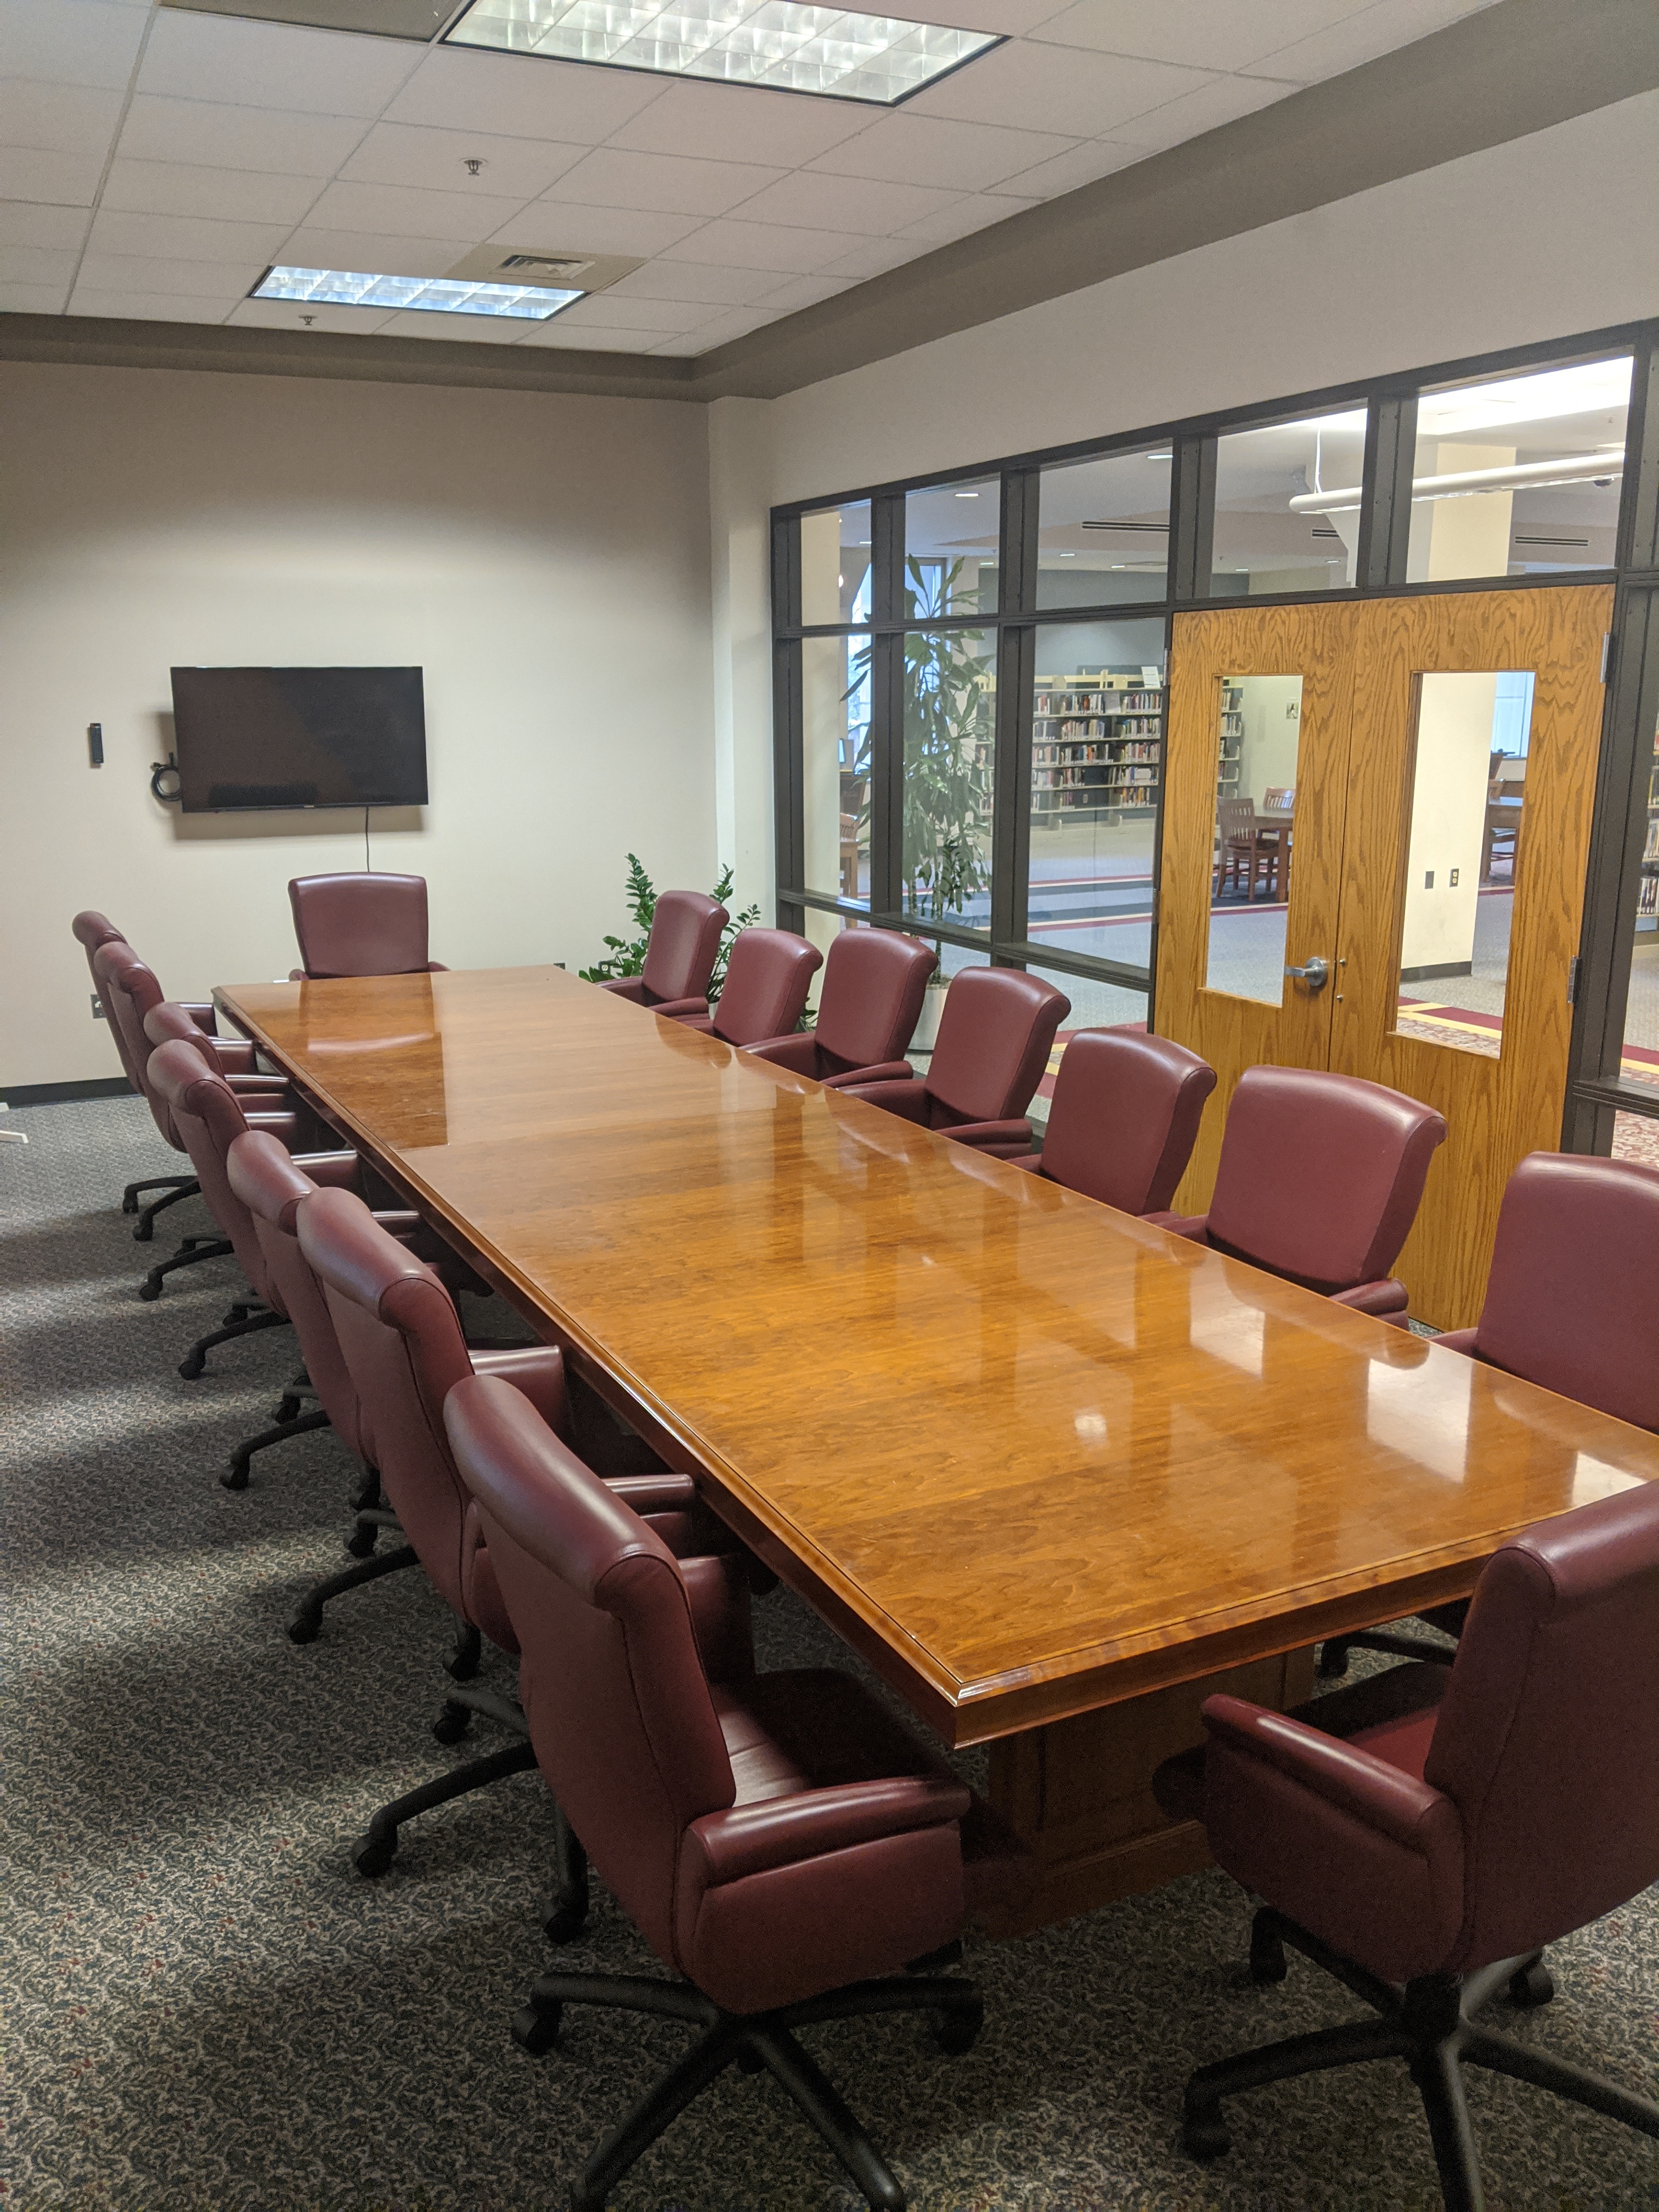 Room photo of the Wren Meeting Room showing long conference table with chairs all around it and a mounted television